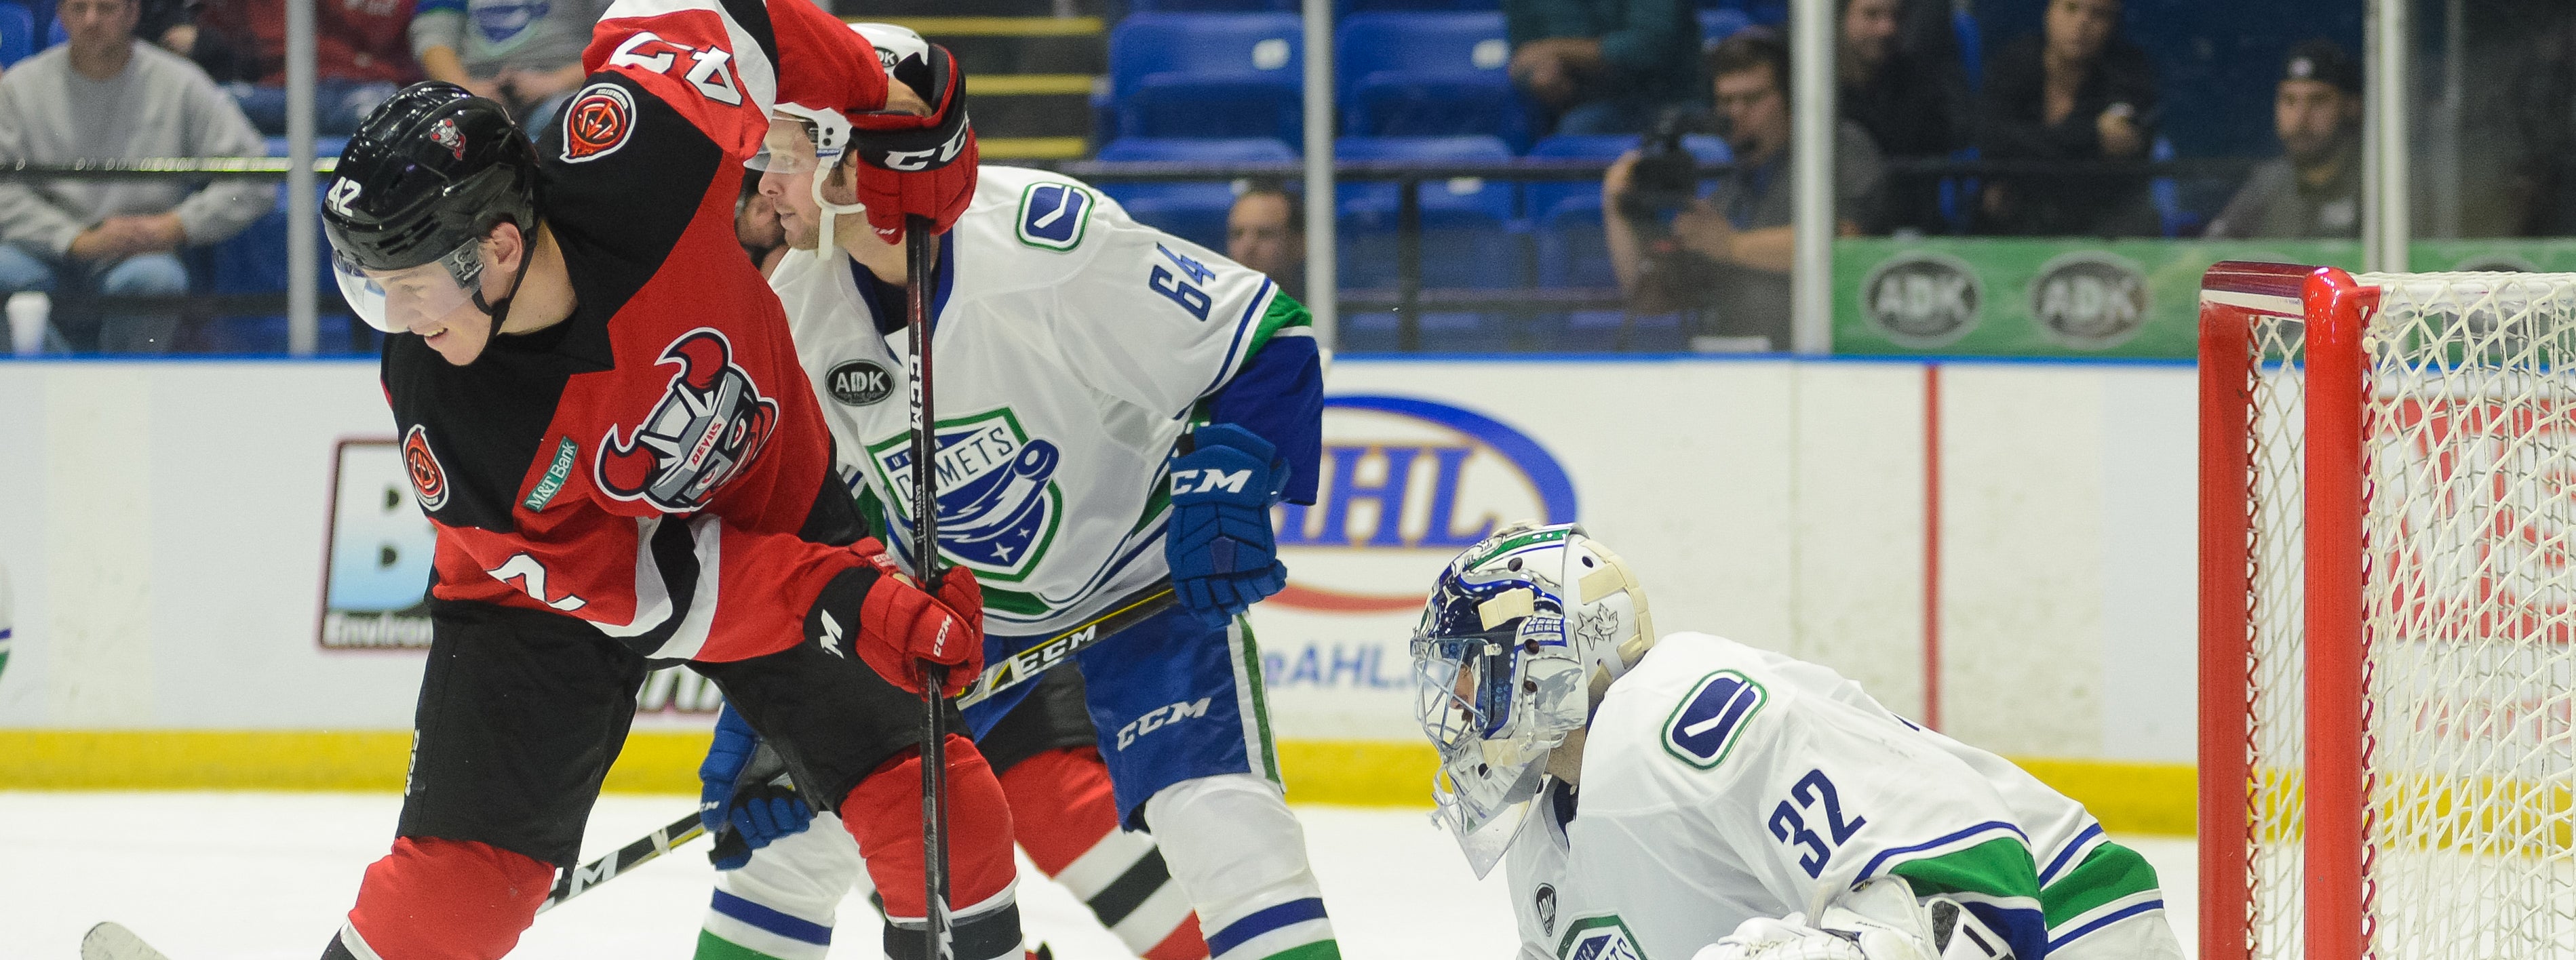 COMETS HEAD SOUTH FOR DUEL WITH DEVILS